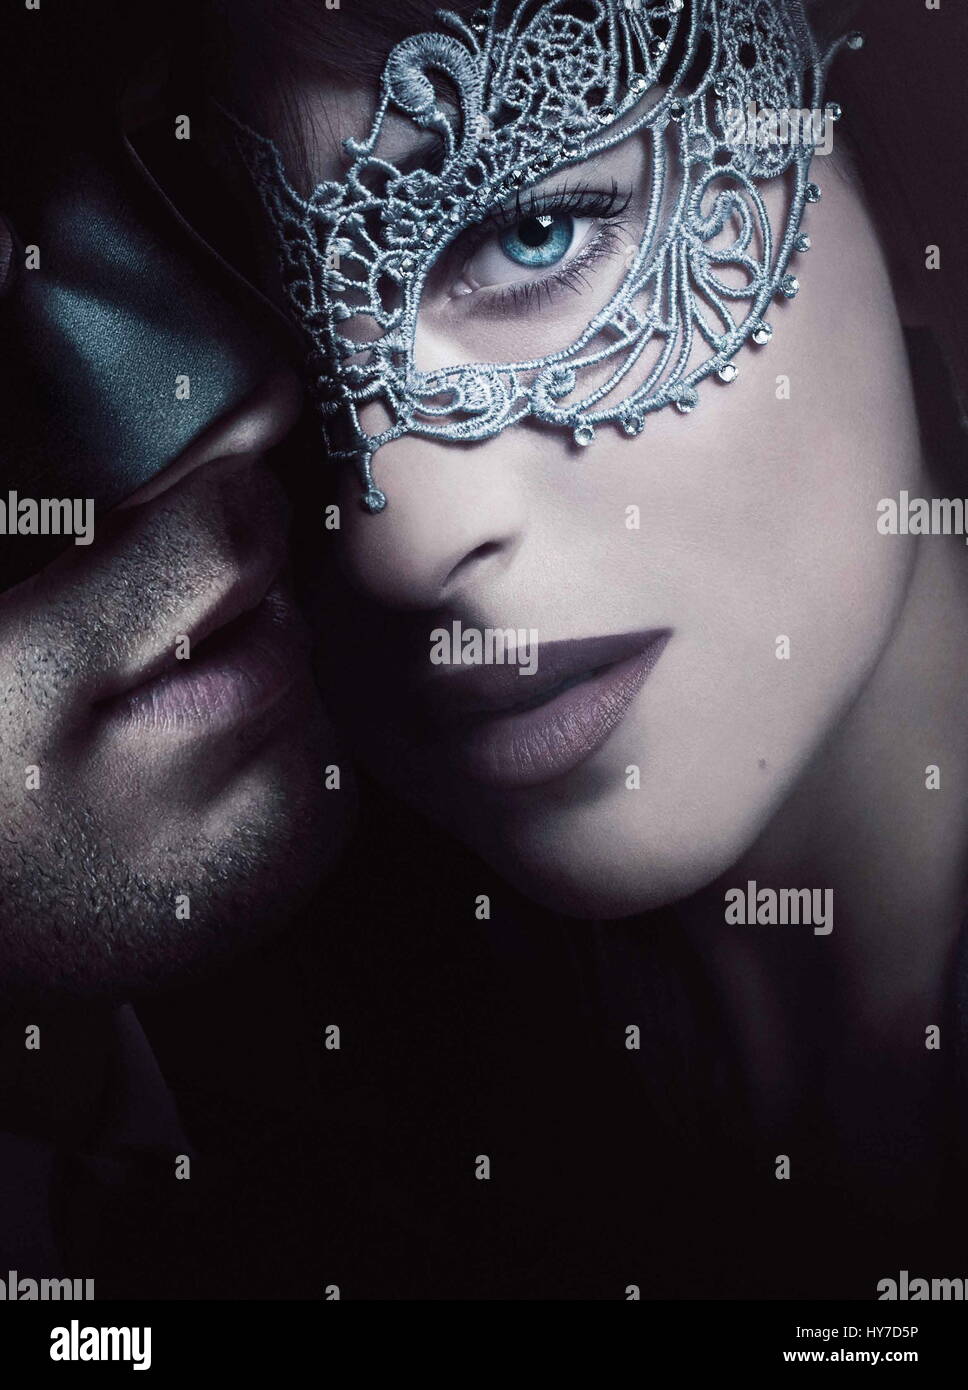 RELEASE DATE: February 10, 2017 TITLE: Fifty Shades Darker STUDIO: Universal Pictures DIRECTOR: James Foley PLOT: While Christian wrestles with his inner demons, Anastasia must confront the anger and envy of the women who came before her STARRING: Dakota Johnson as Anastasia Steele, Jamie Dornan as Christian Grey Poster Art (Credit: © Universal Pictures/Entertainment Pictures) Stock Photo